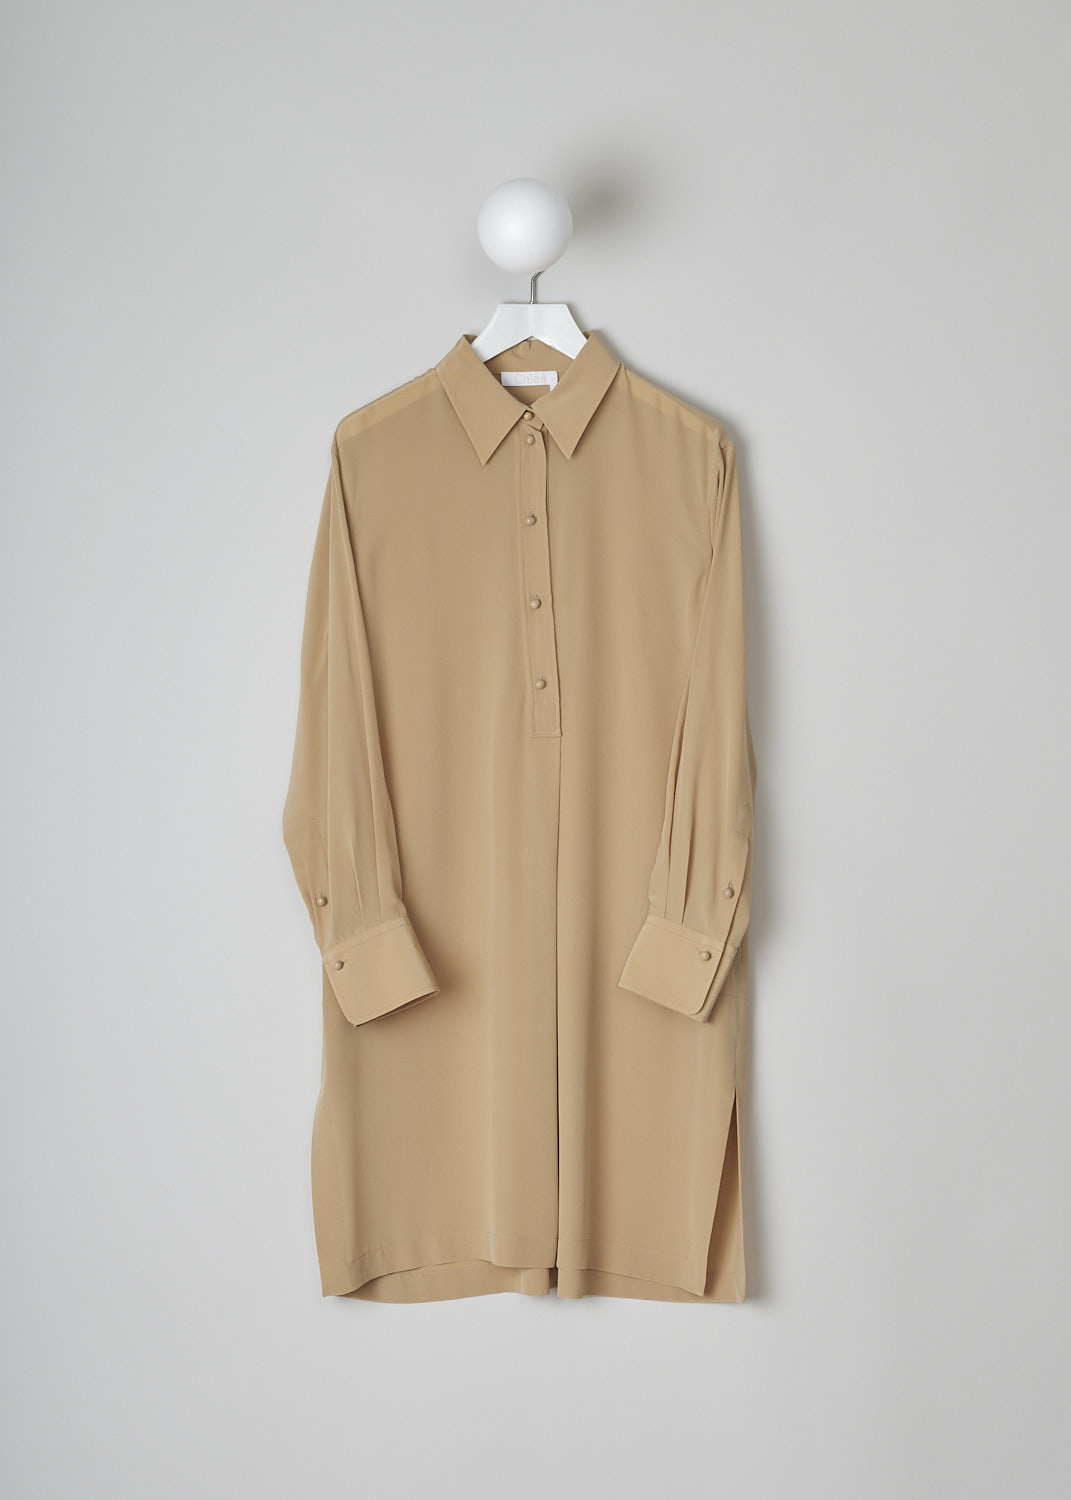 CHLOÉ, PEARL BEIGE SILK SHIRT DRESS, CHC22URO64004278, Beige, Front, This pearl beige silk dress has a classic collar and a button placket with round ceramic buttons that go halfway across the chest. Below the placket, a single knife pleats goes down to the hemline. This loose fitted dress has long sleeves with buttoned cuffs. Slanted pockets are concealed in the side seam. The dress has side slits and an asymmetrical finish, meaning the back is a little longer than the front. A centre box pleat runs vertically down the back.
